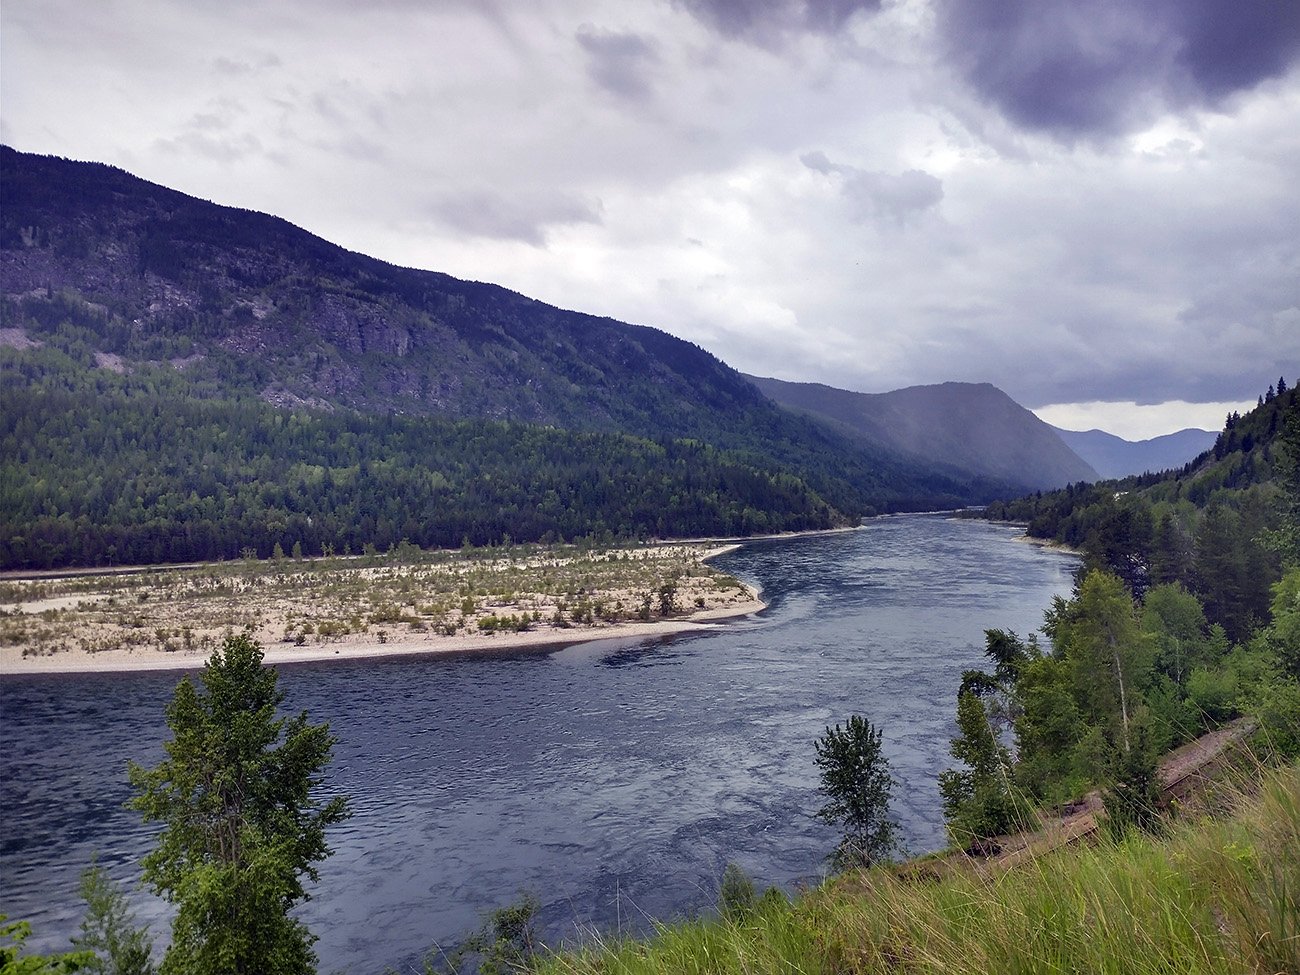 Quite nice views as you follow the river from Castlegar to Trail. No more desert and vineyards though.